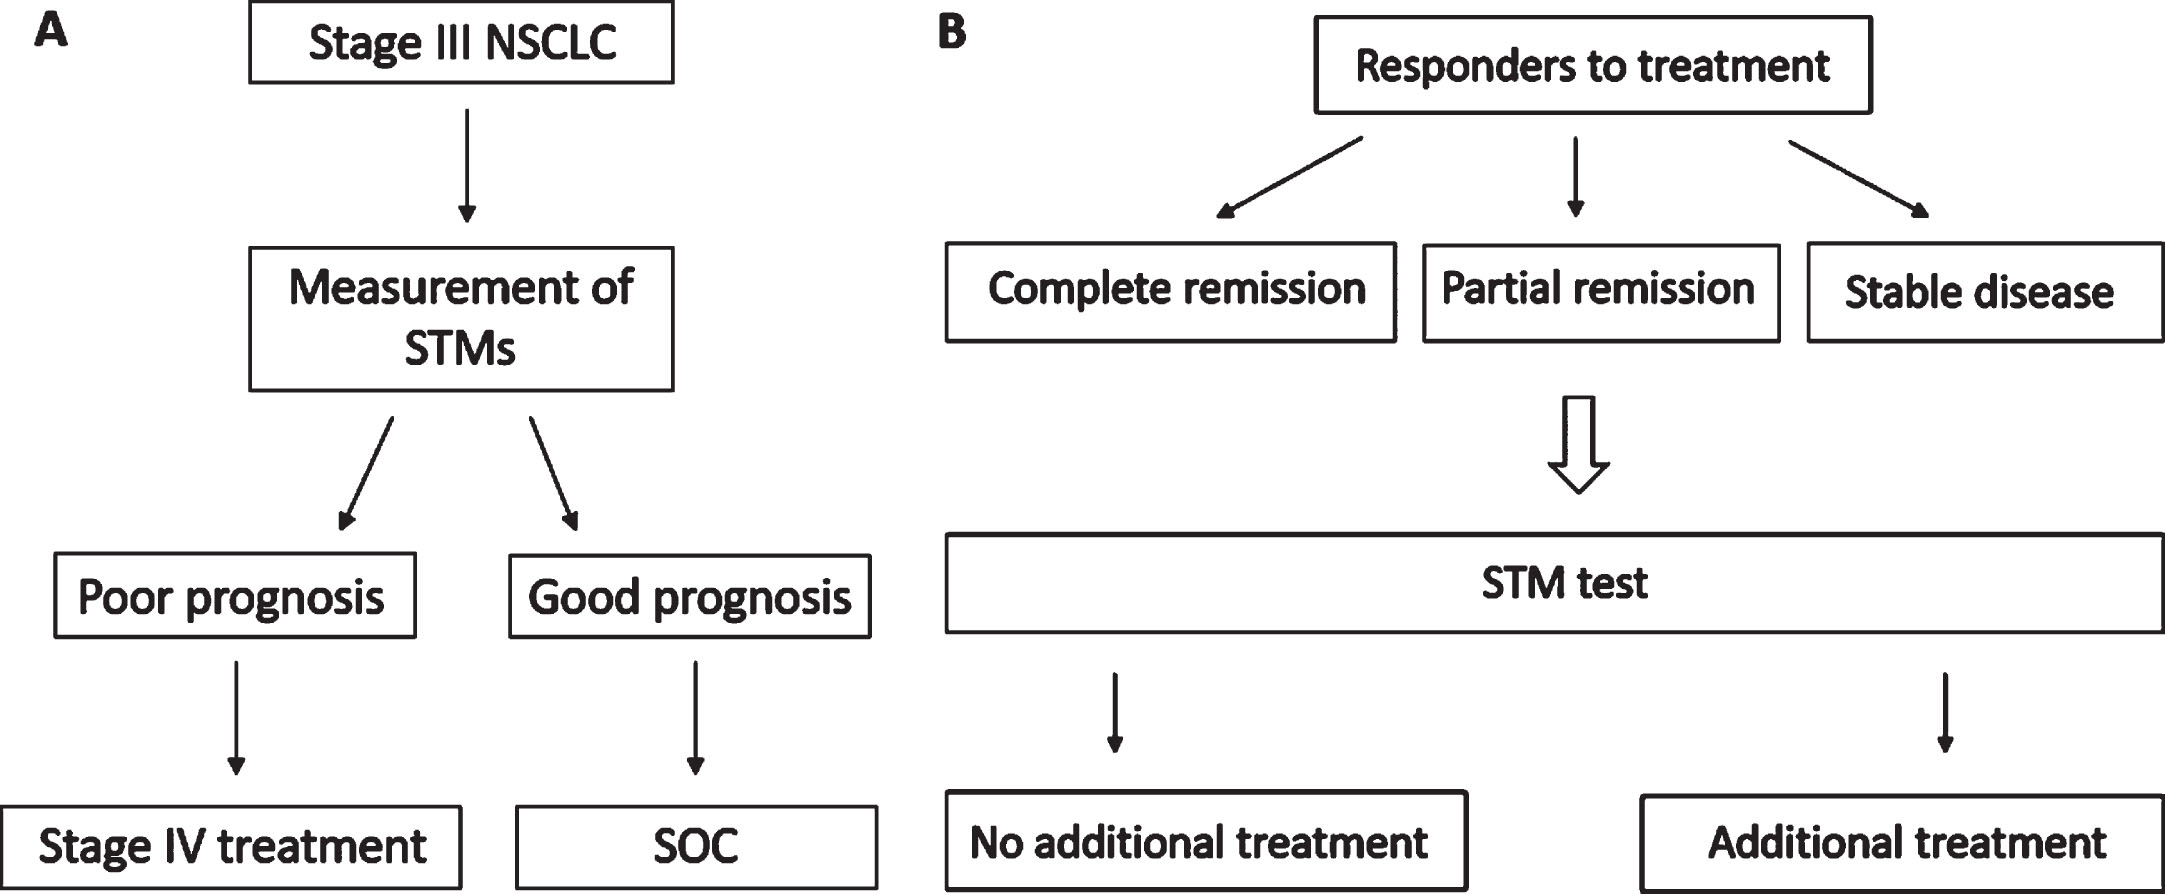 Flowcharts showing two potential scenarios for the treatment management of (A) stage III and (B) stage IV advanced NSCLC patients. Abbreviations: NSCLC, non-small cell lung cancer; STMs, serum tumor markers; OS, overall survival; SOC, standard of care.